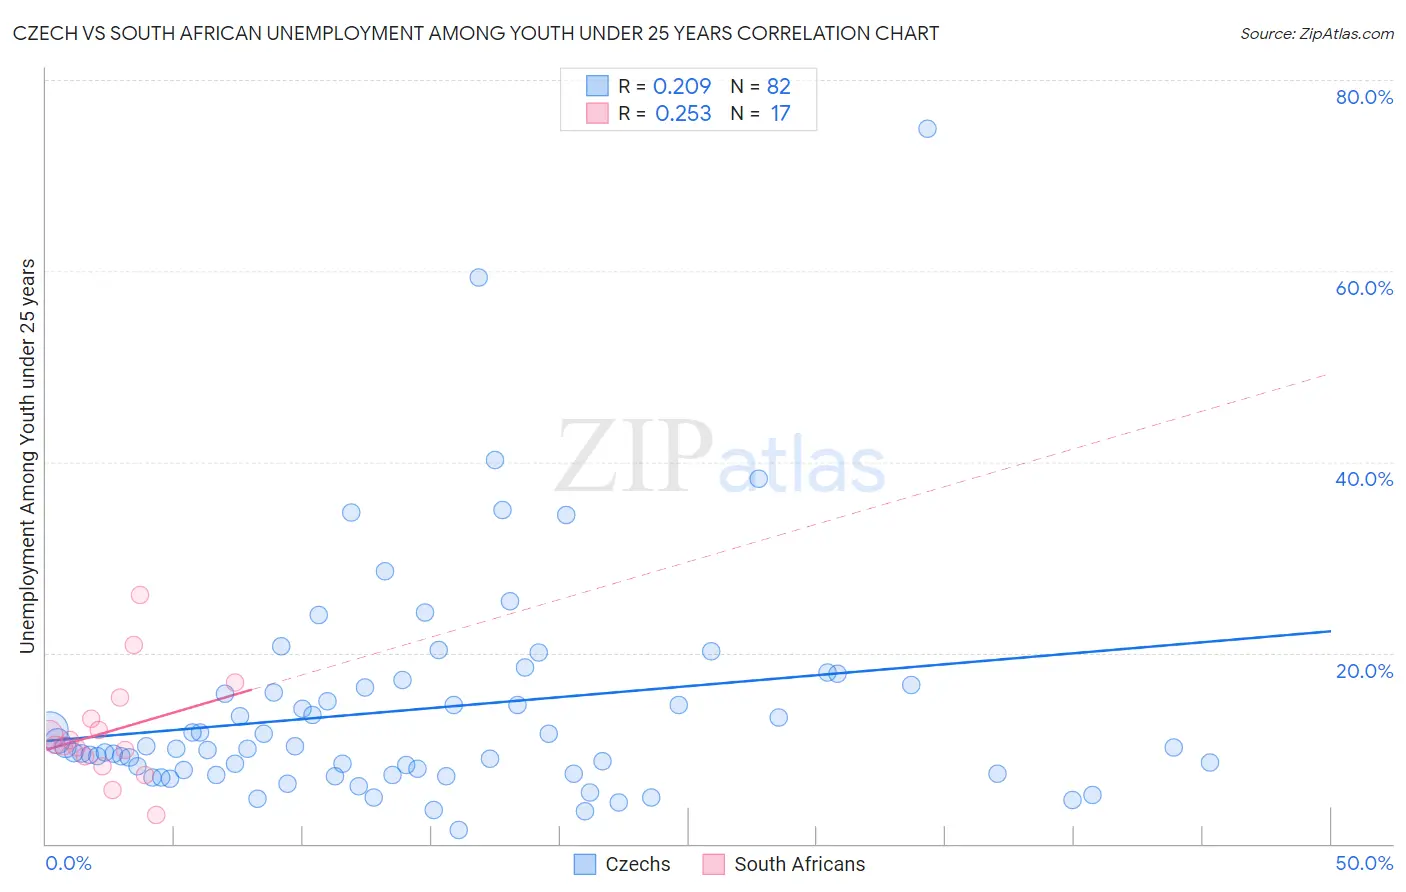 Czech vs South African Unemployment Among Youth under 25 years